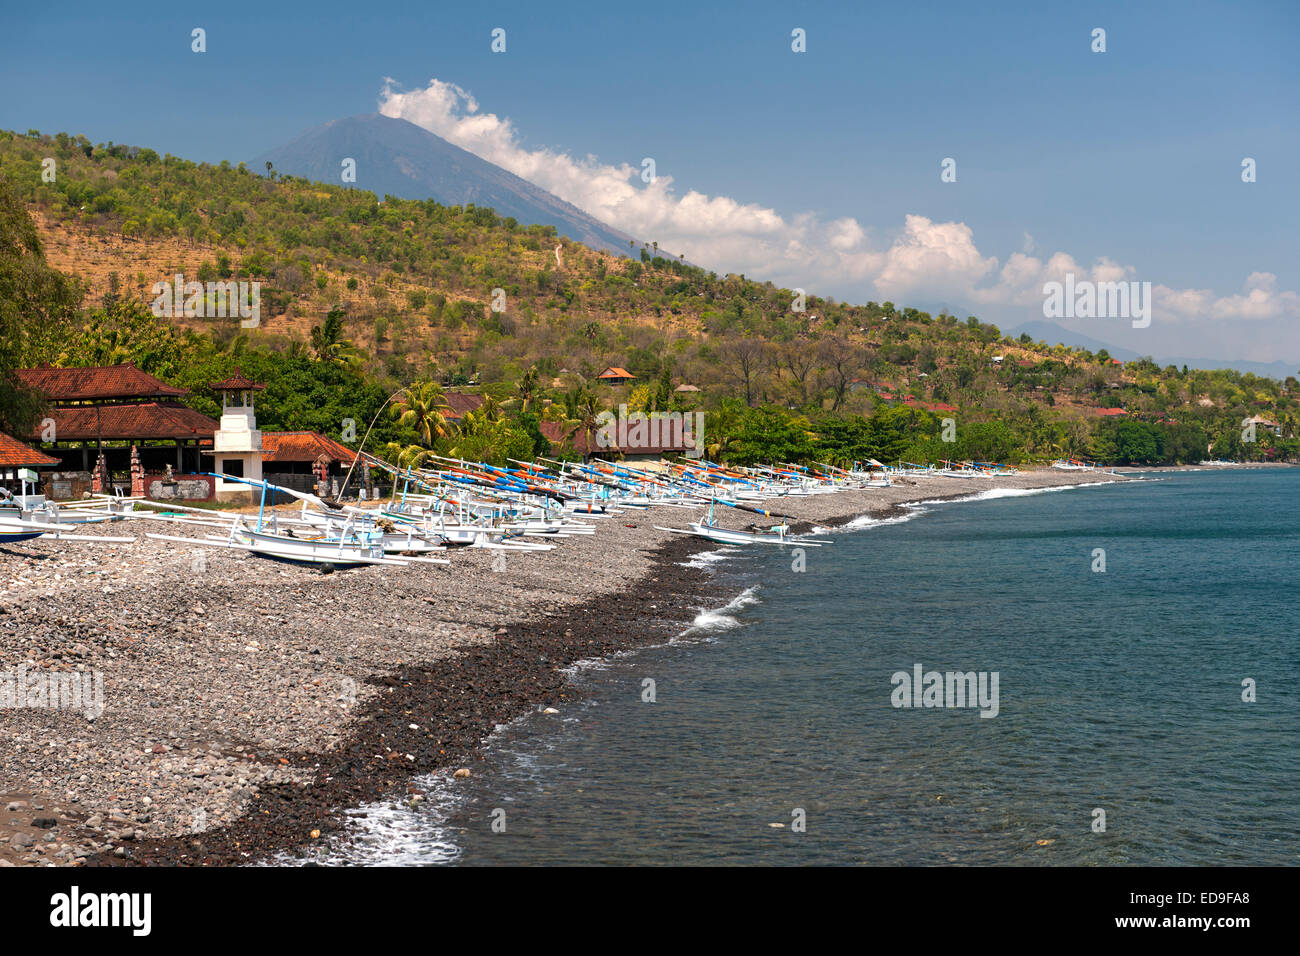 View of Mount Agung (3142) and Jemulek beach near Amed on the northeast coast of Bali, Indonesia. Stock Photo